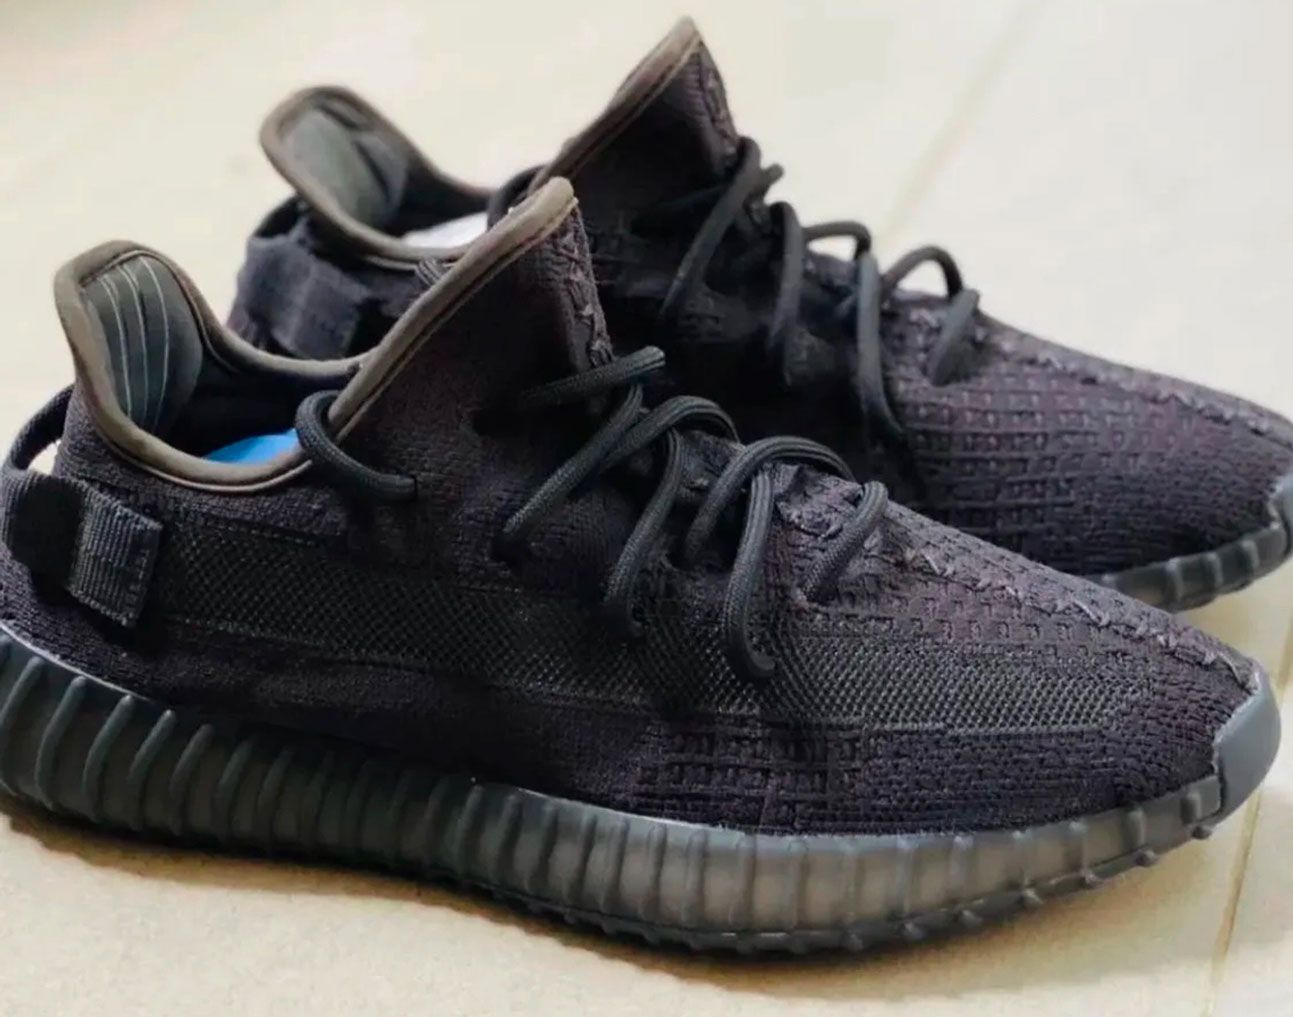 adidas Yeezy Boost 350 v2 Black: Release Date, Price, And Where To Buy